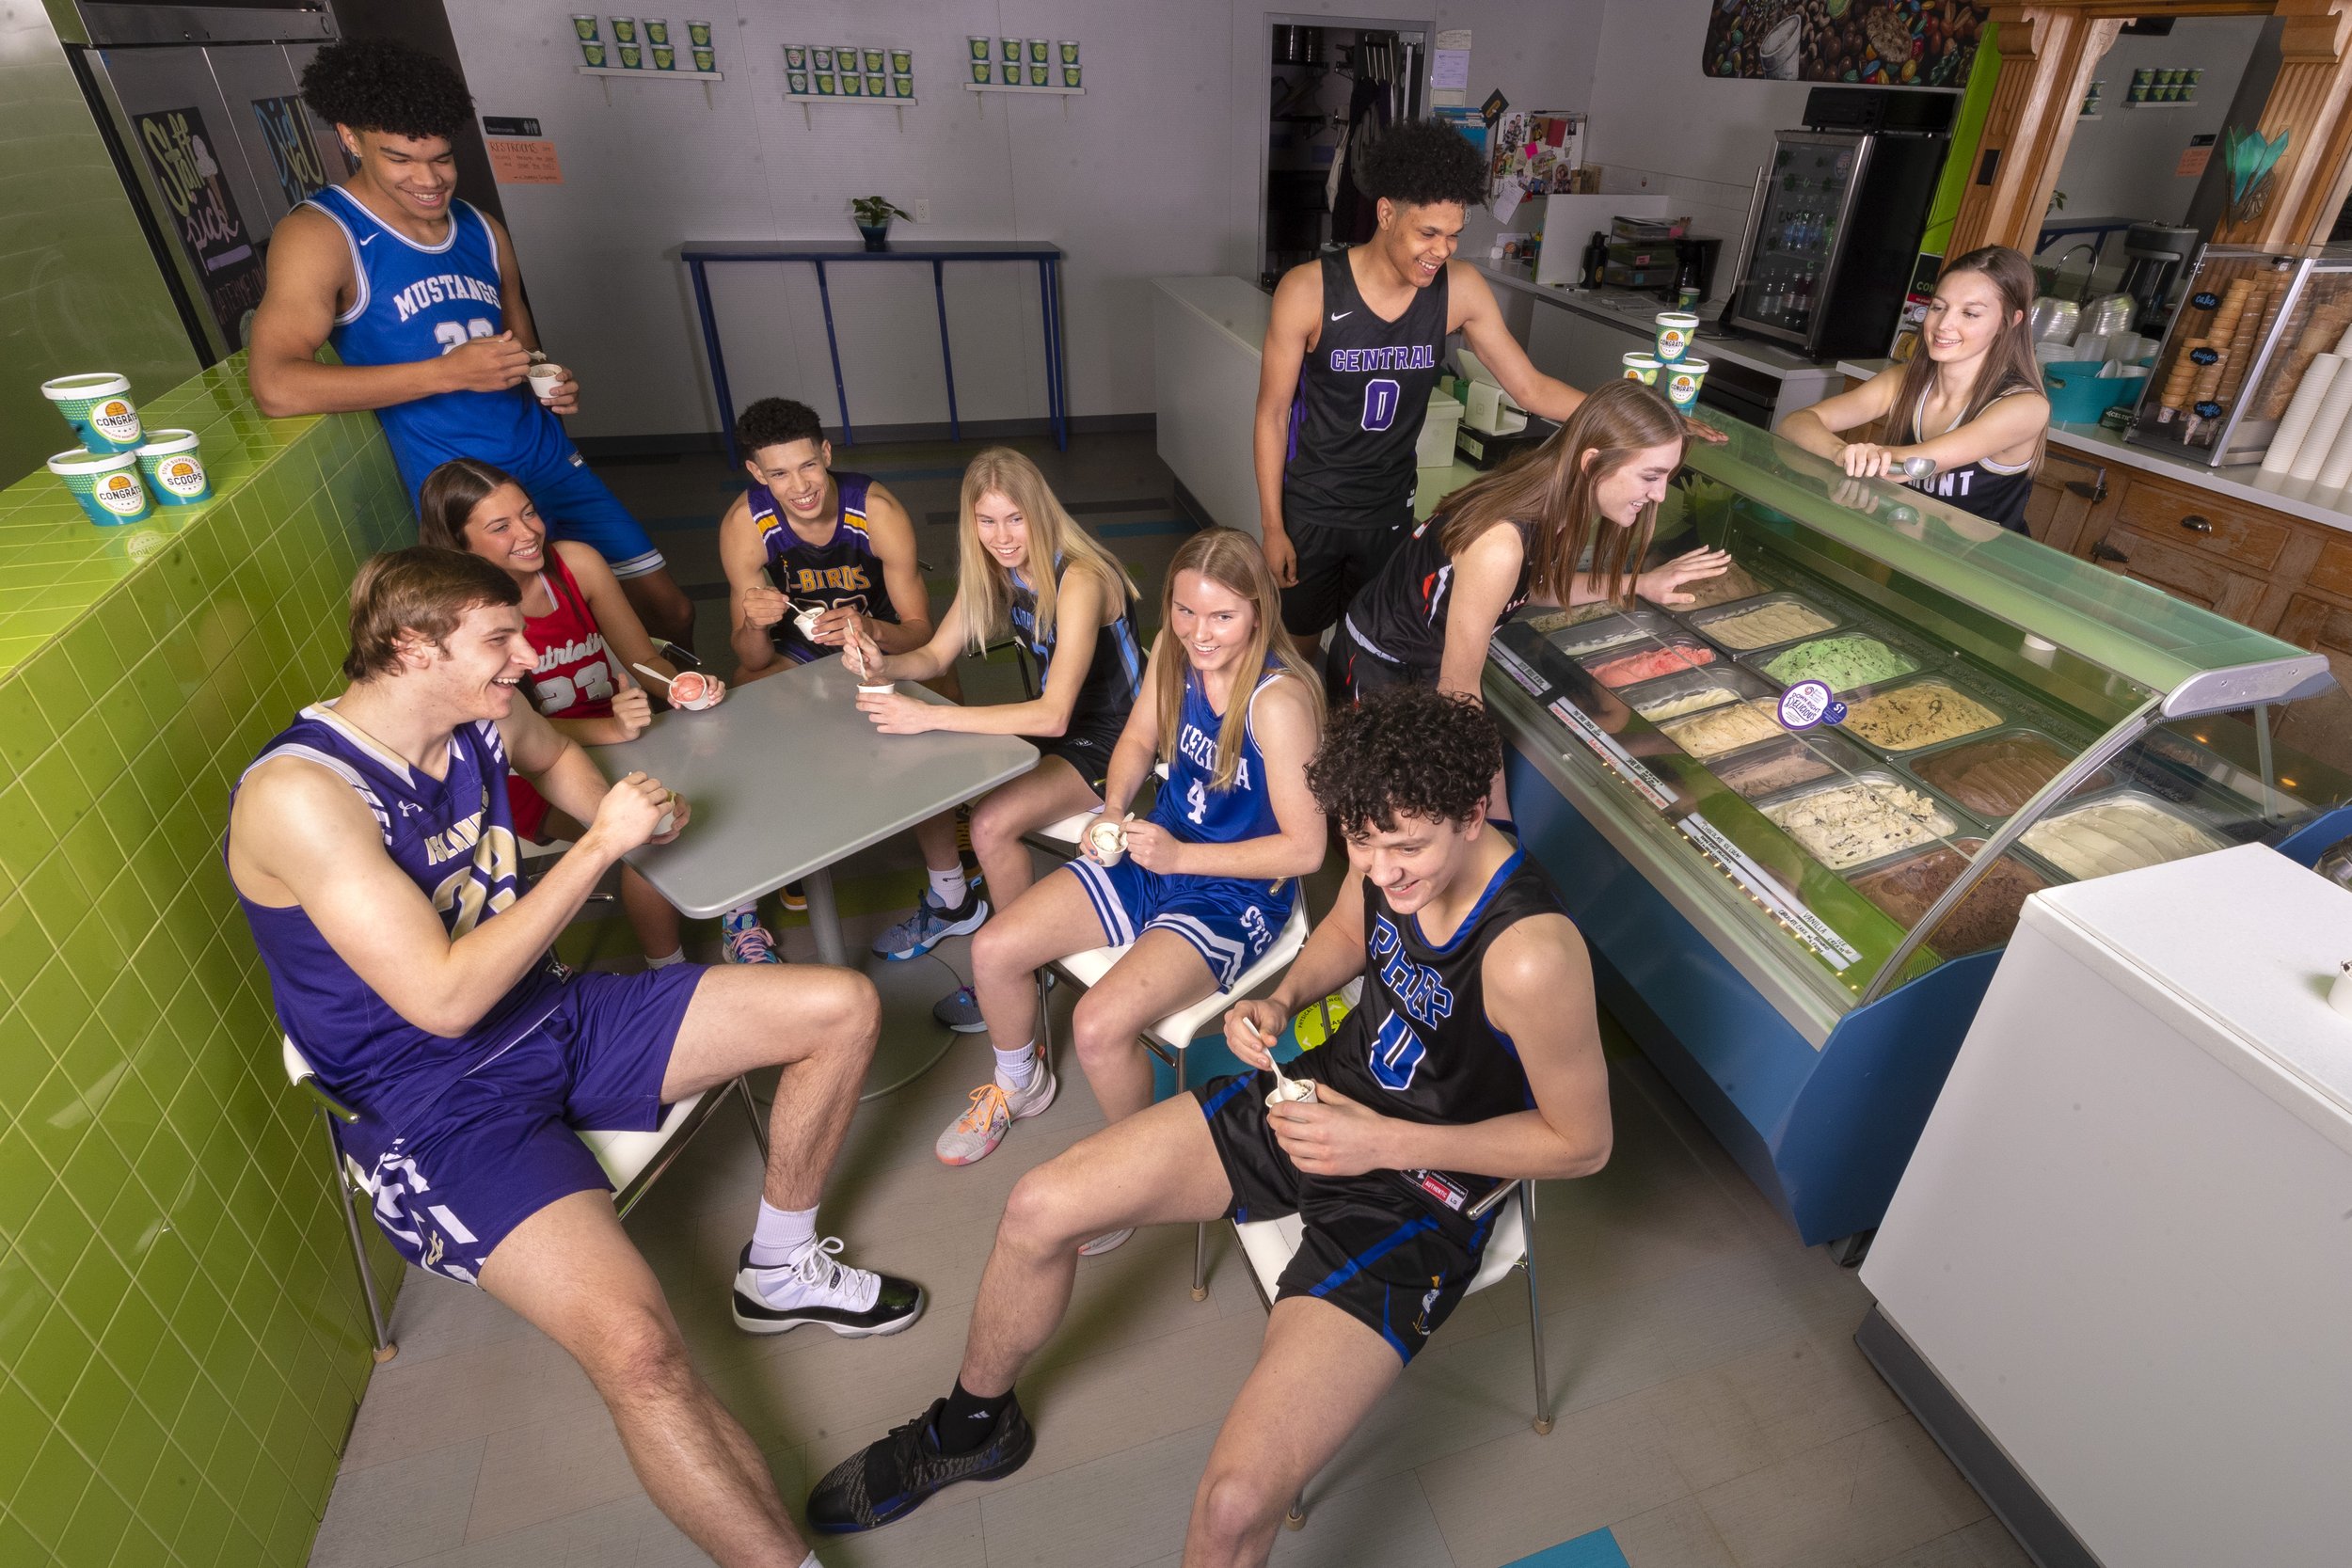  The ten super state players from all across Nebraska enjoy some ice cream at eCreamery for the Super-State hoops package, on March 22, 2022, in Omaha, Nebraska. 